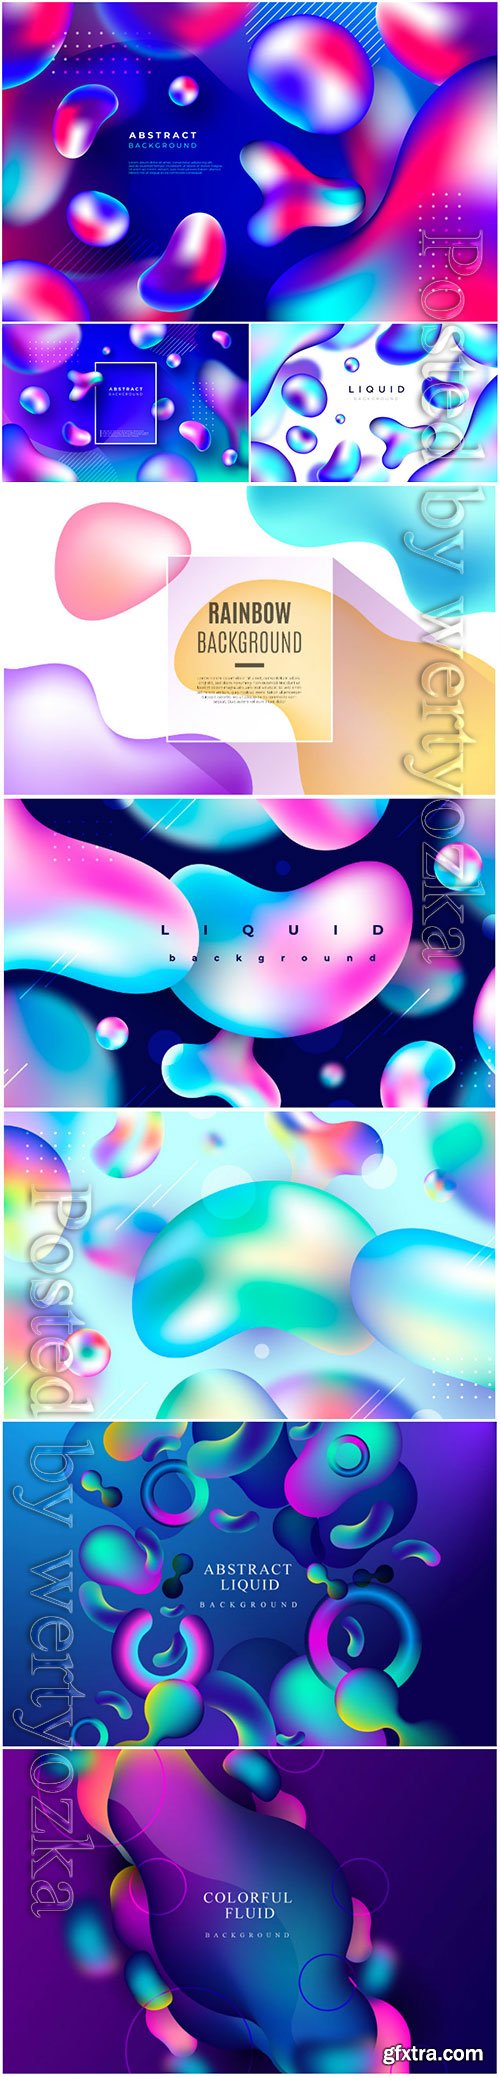 Abstract vector background with liquid shapes